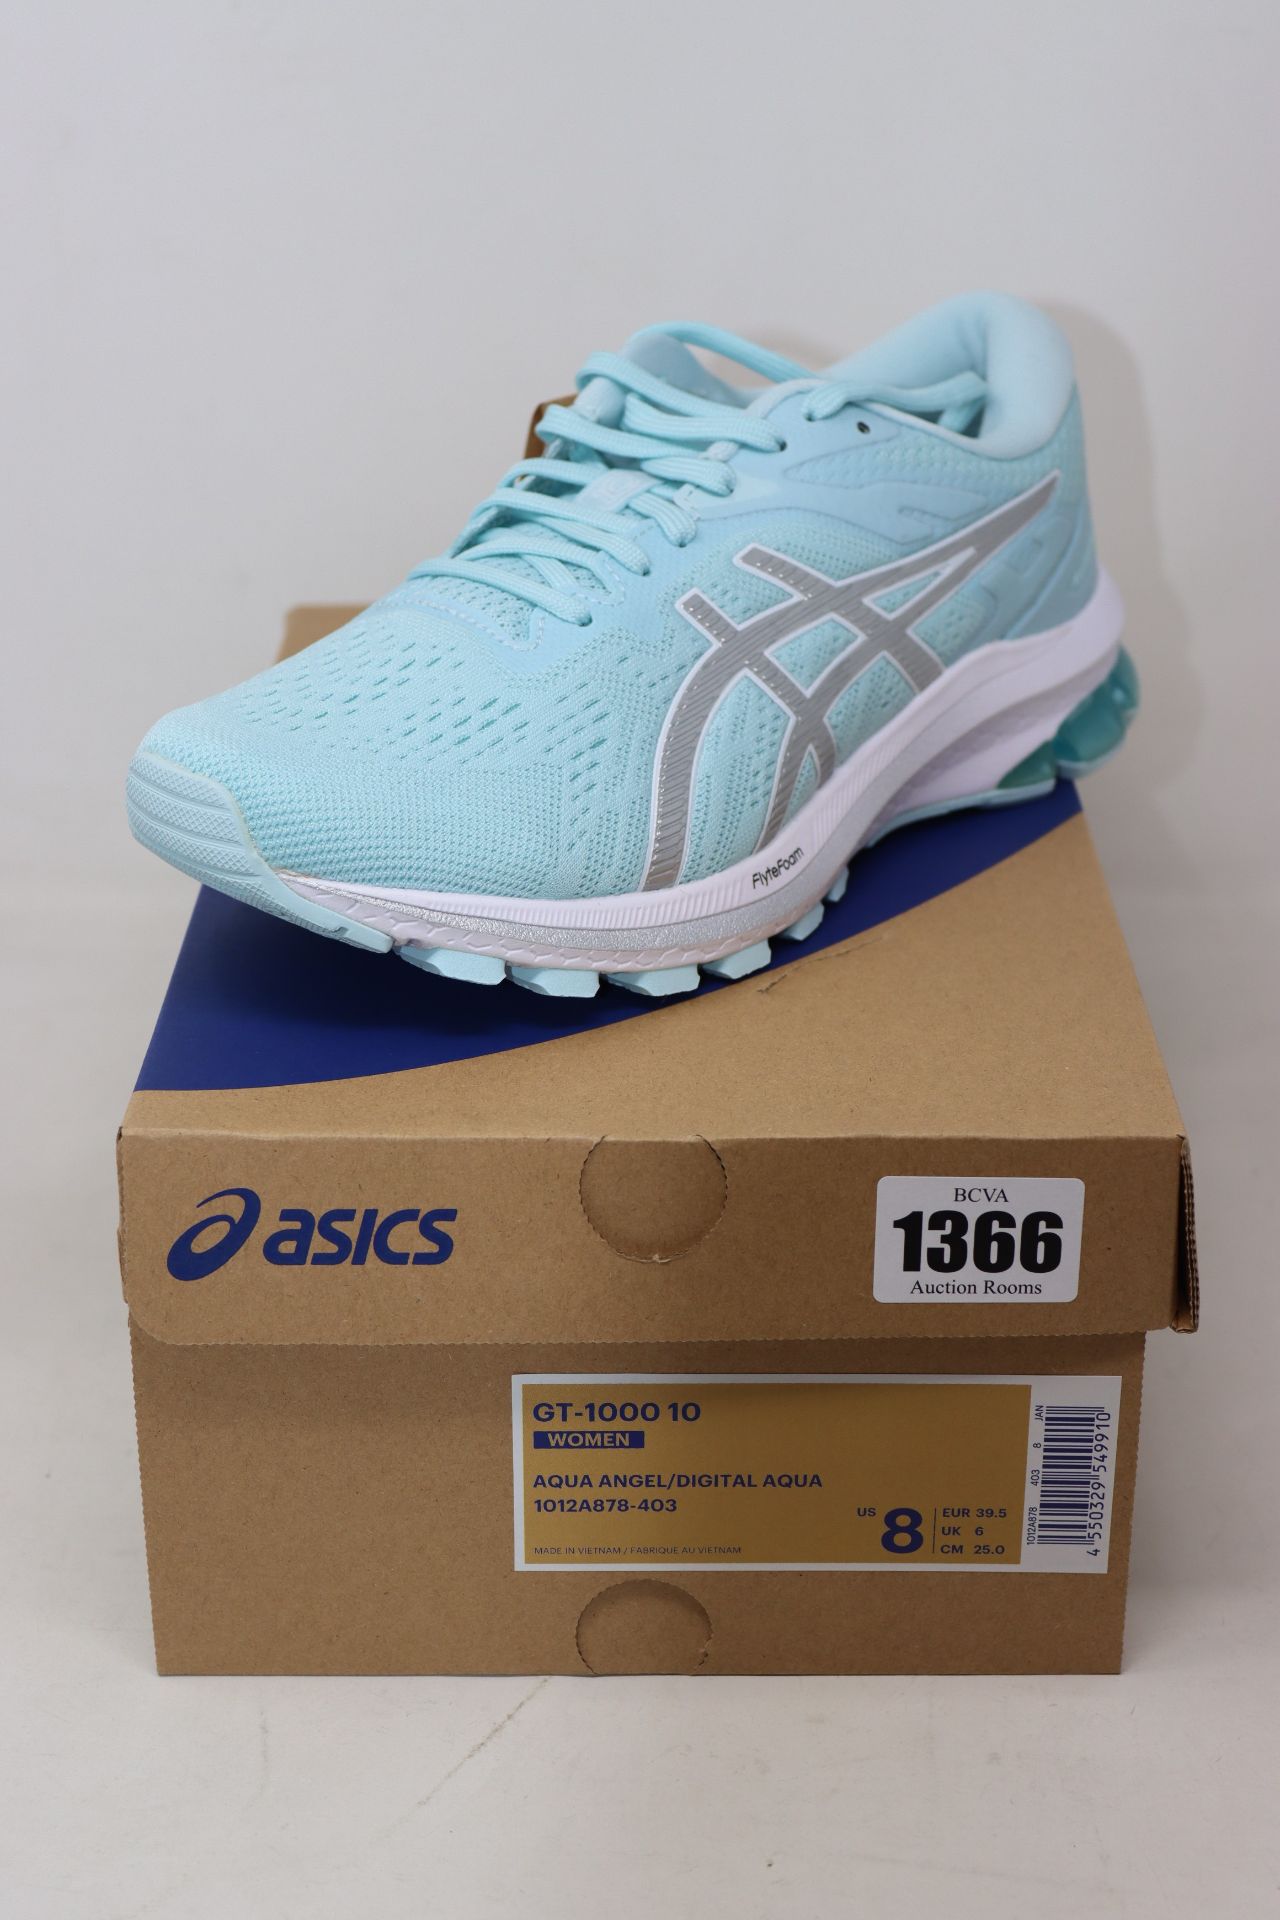 A pair of women's as new Asics GT-1000 10 trainers (UK 6).